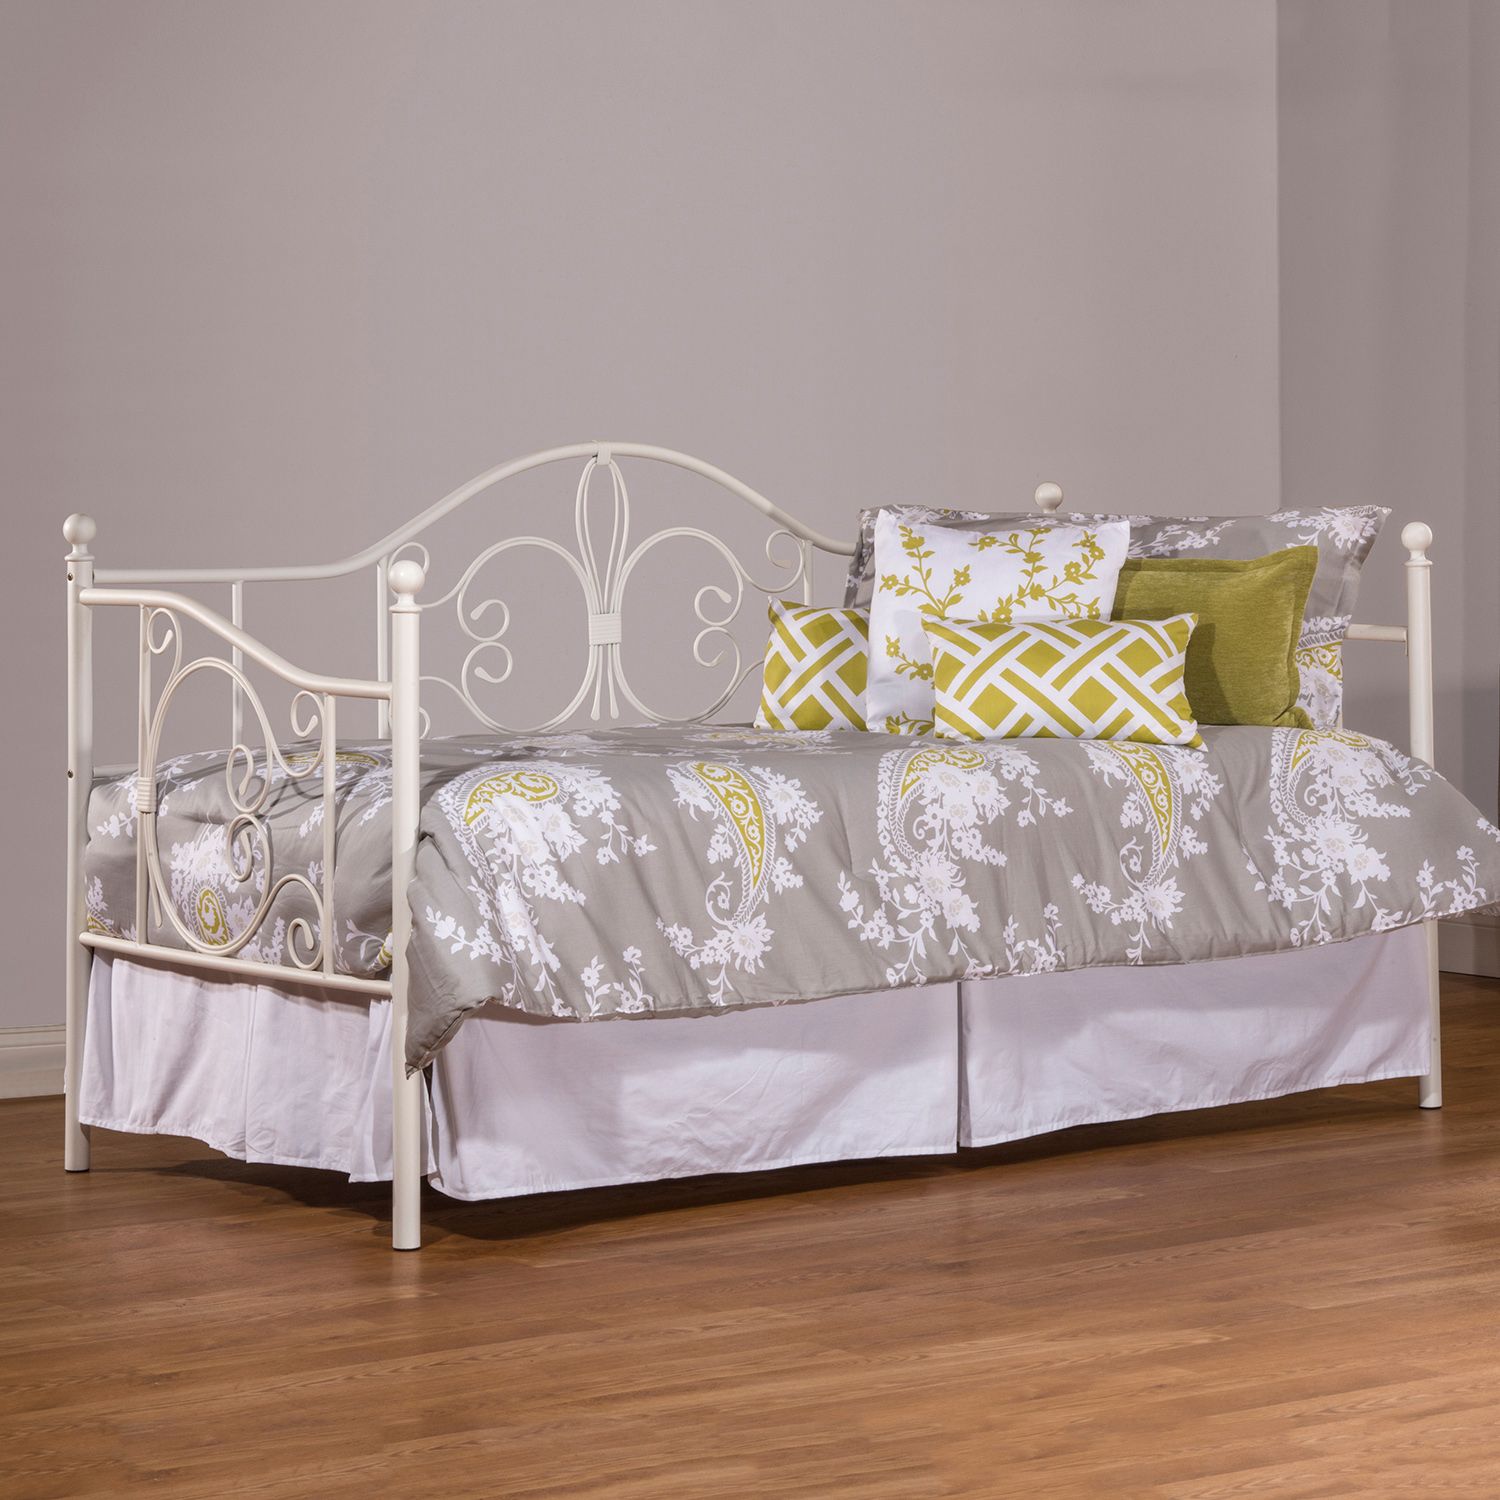 Image for Hillsdale Furniture Ruby Daybed at Kohl's.